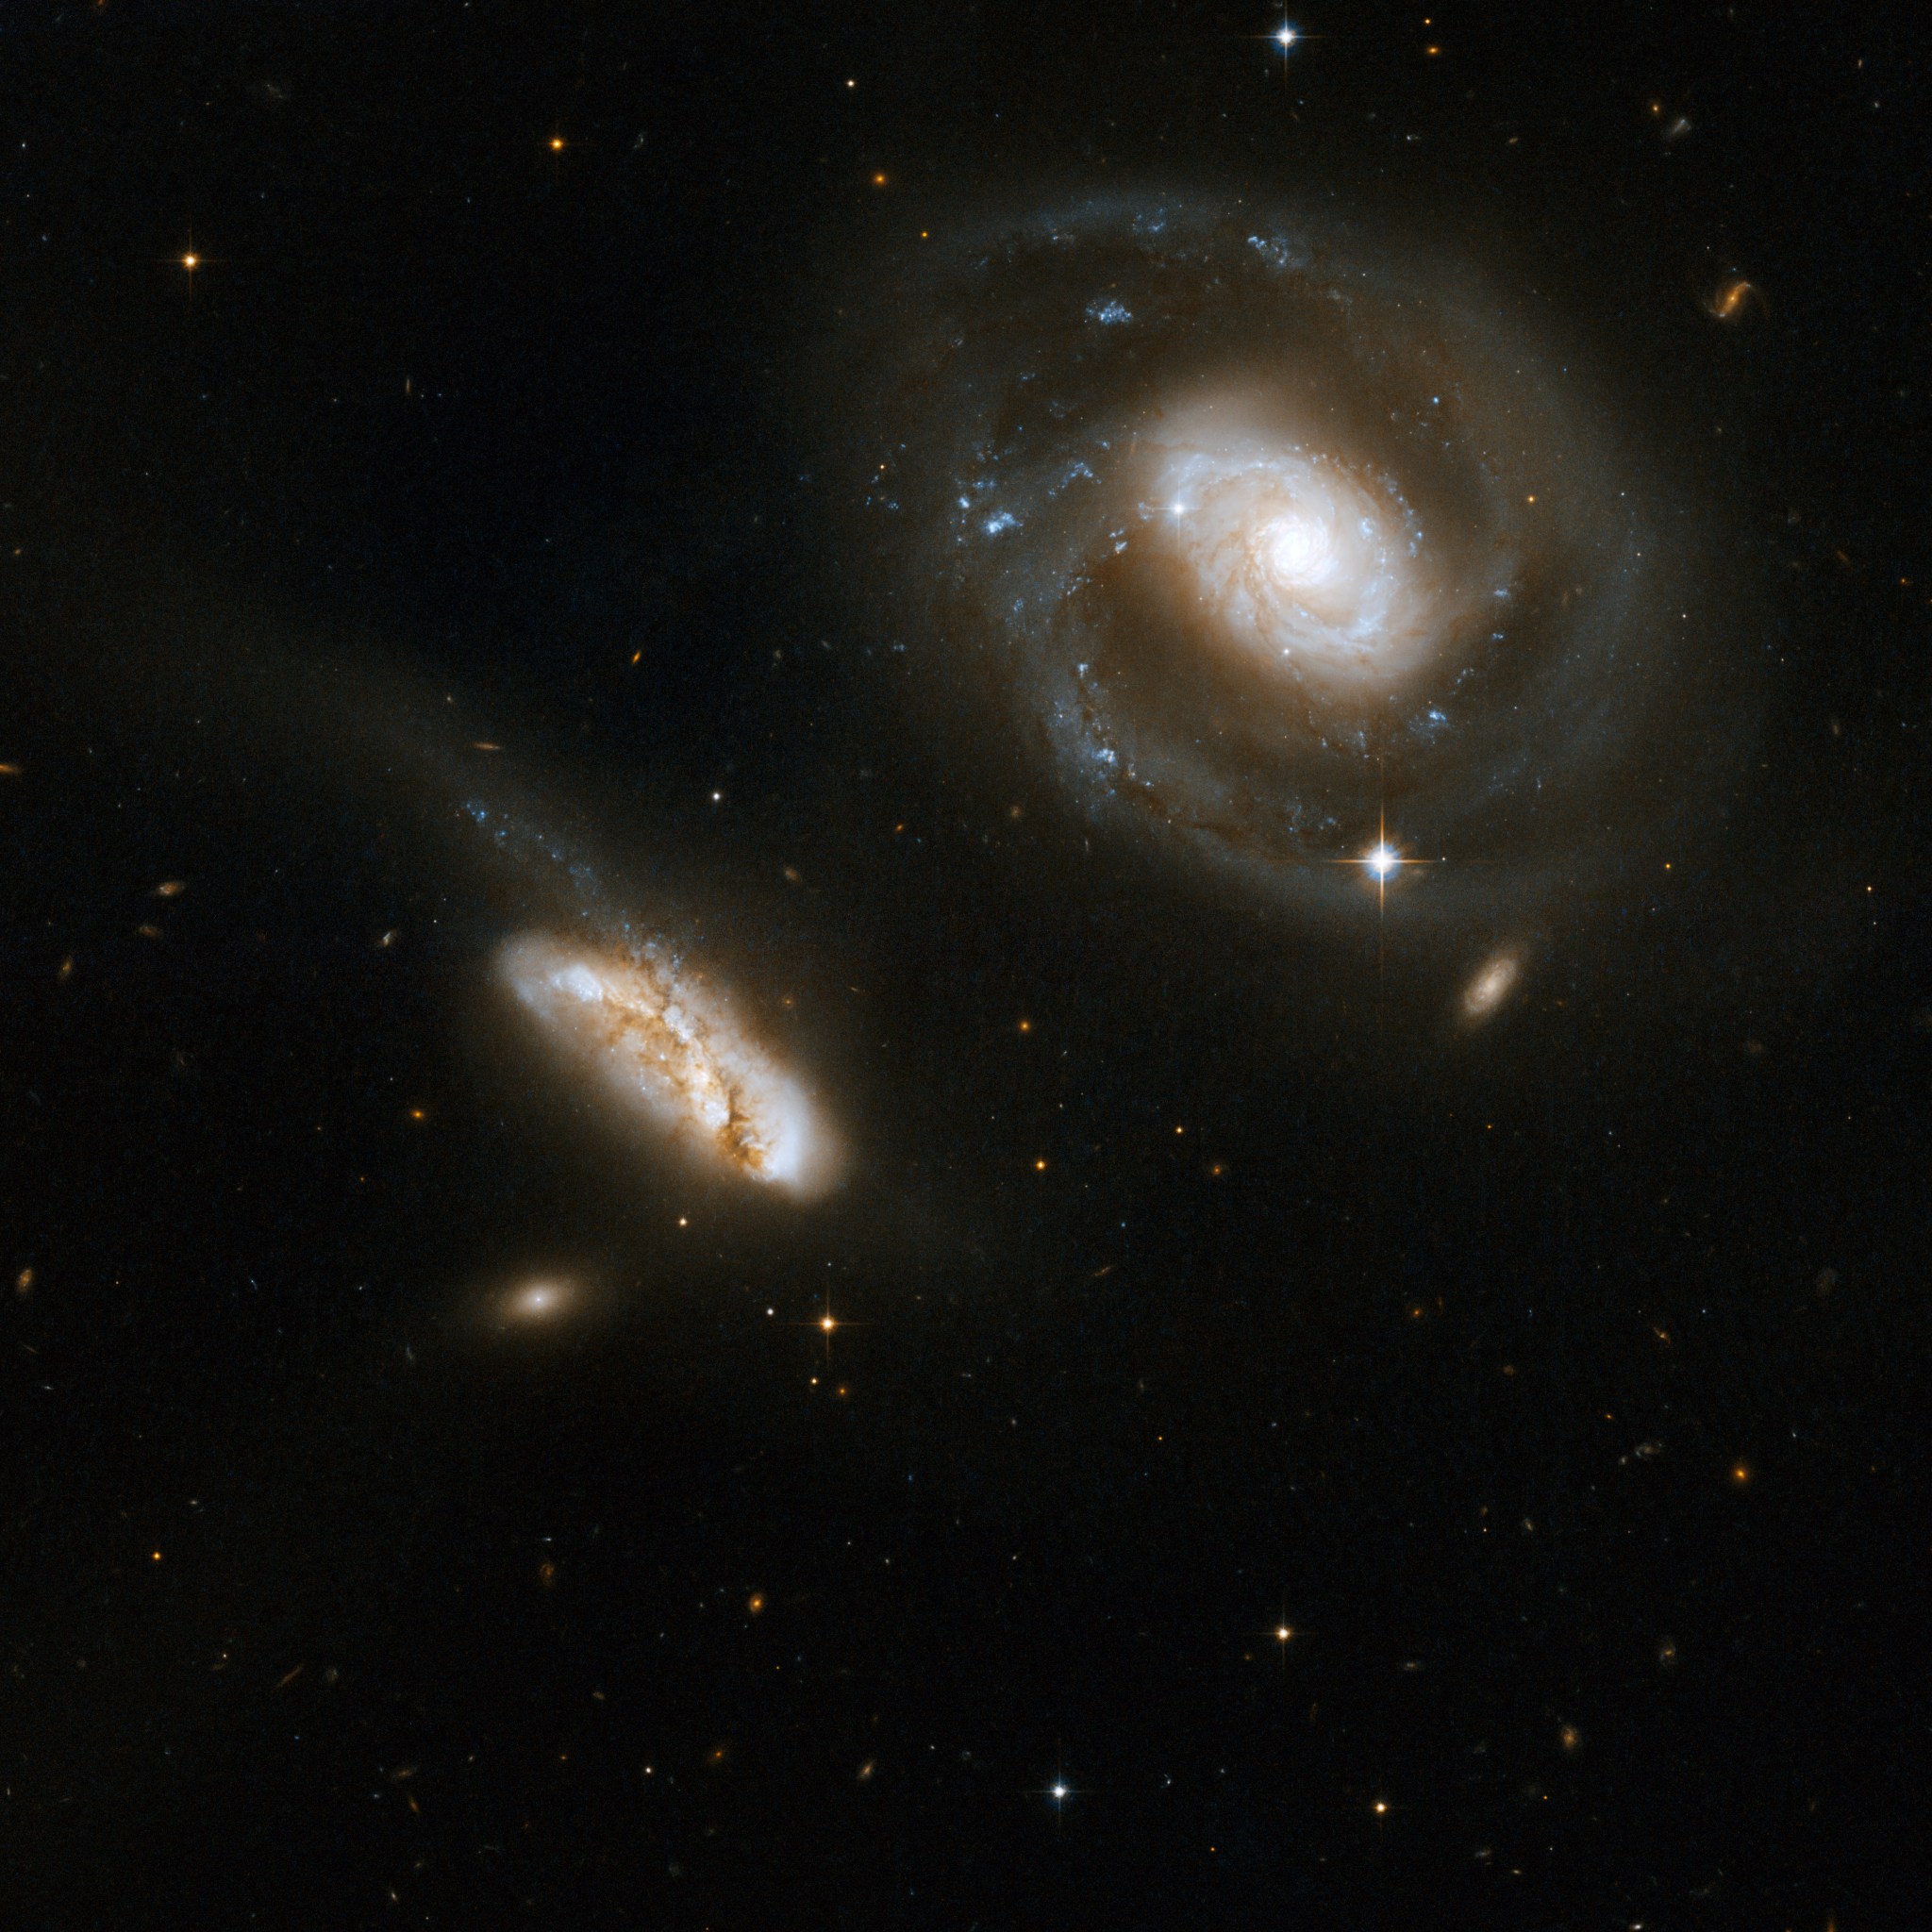 Since the galaxies that make up NGC 7469 are both almost face-on when viewed from Earth, it's easier to where black holes may be